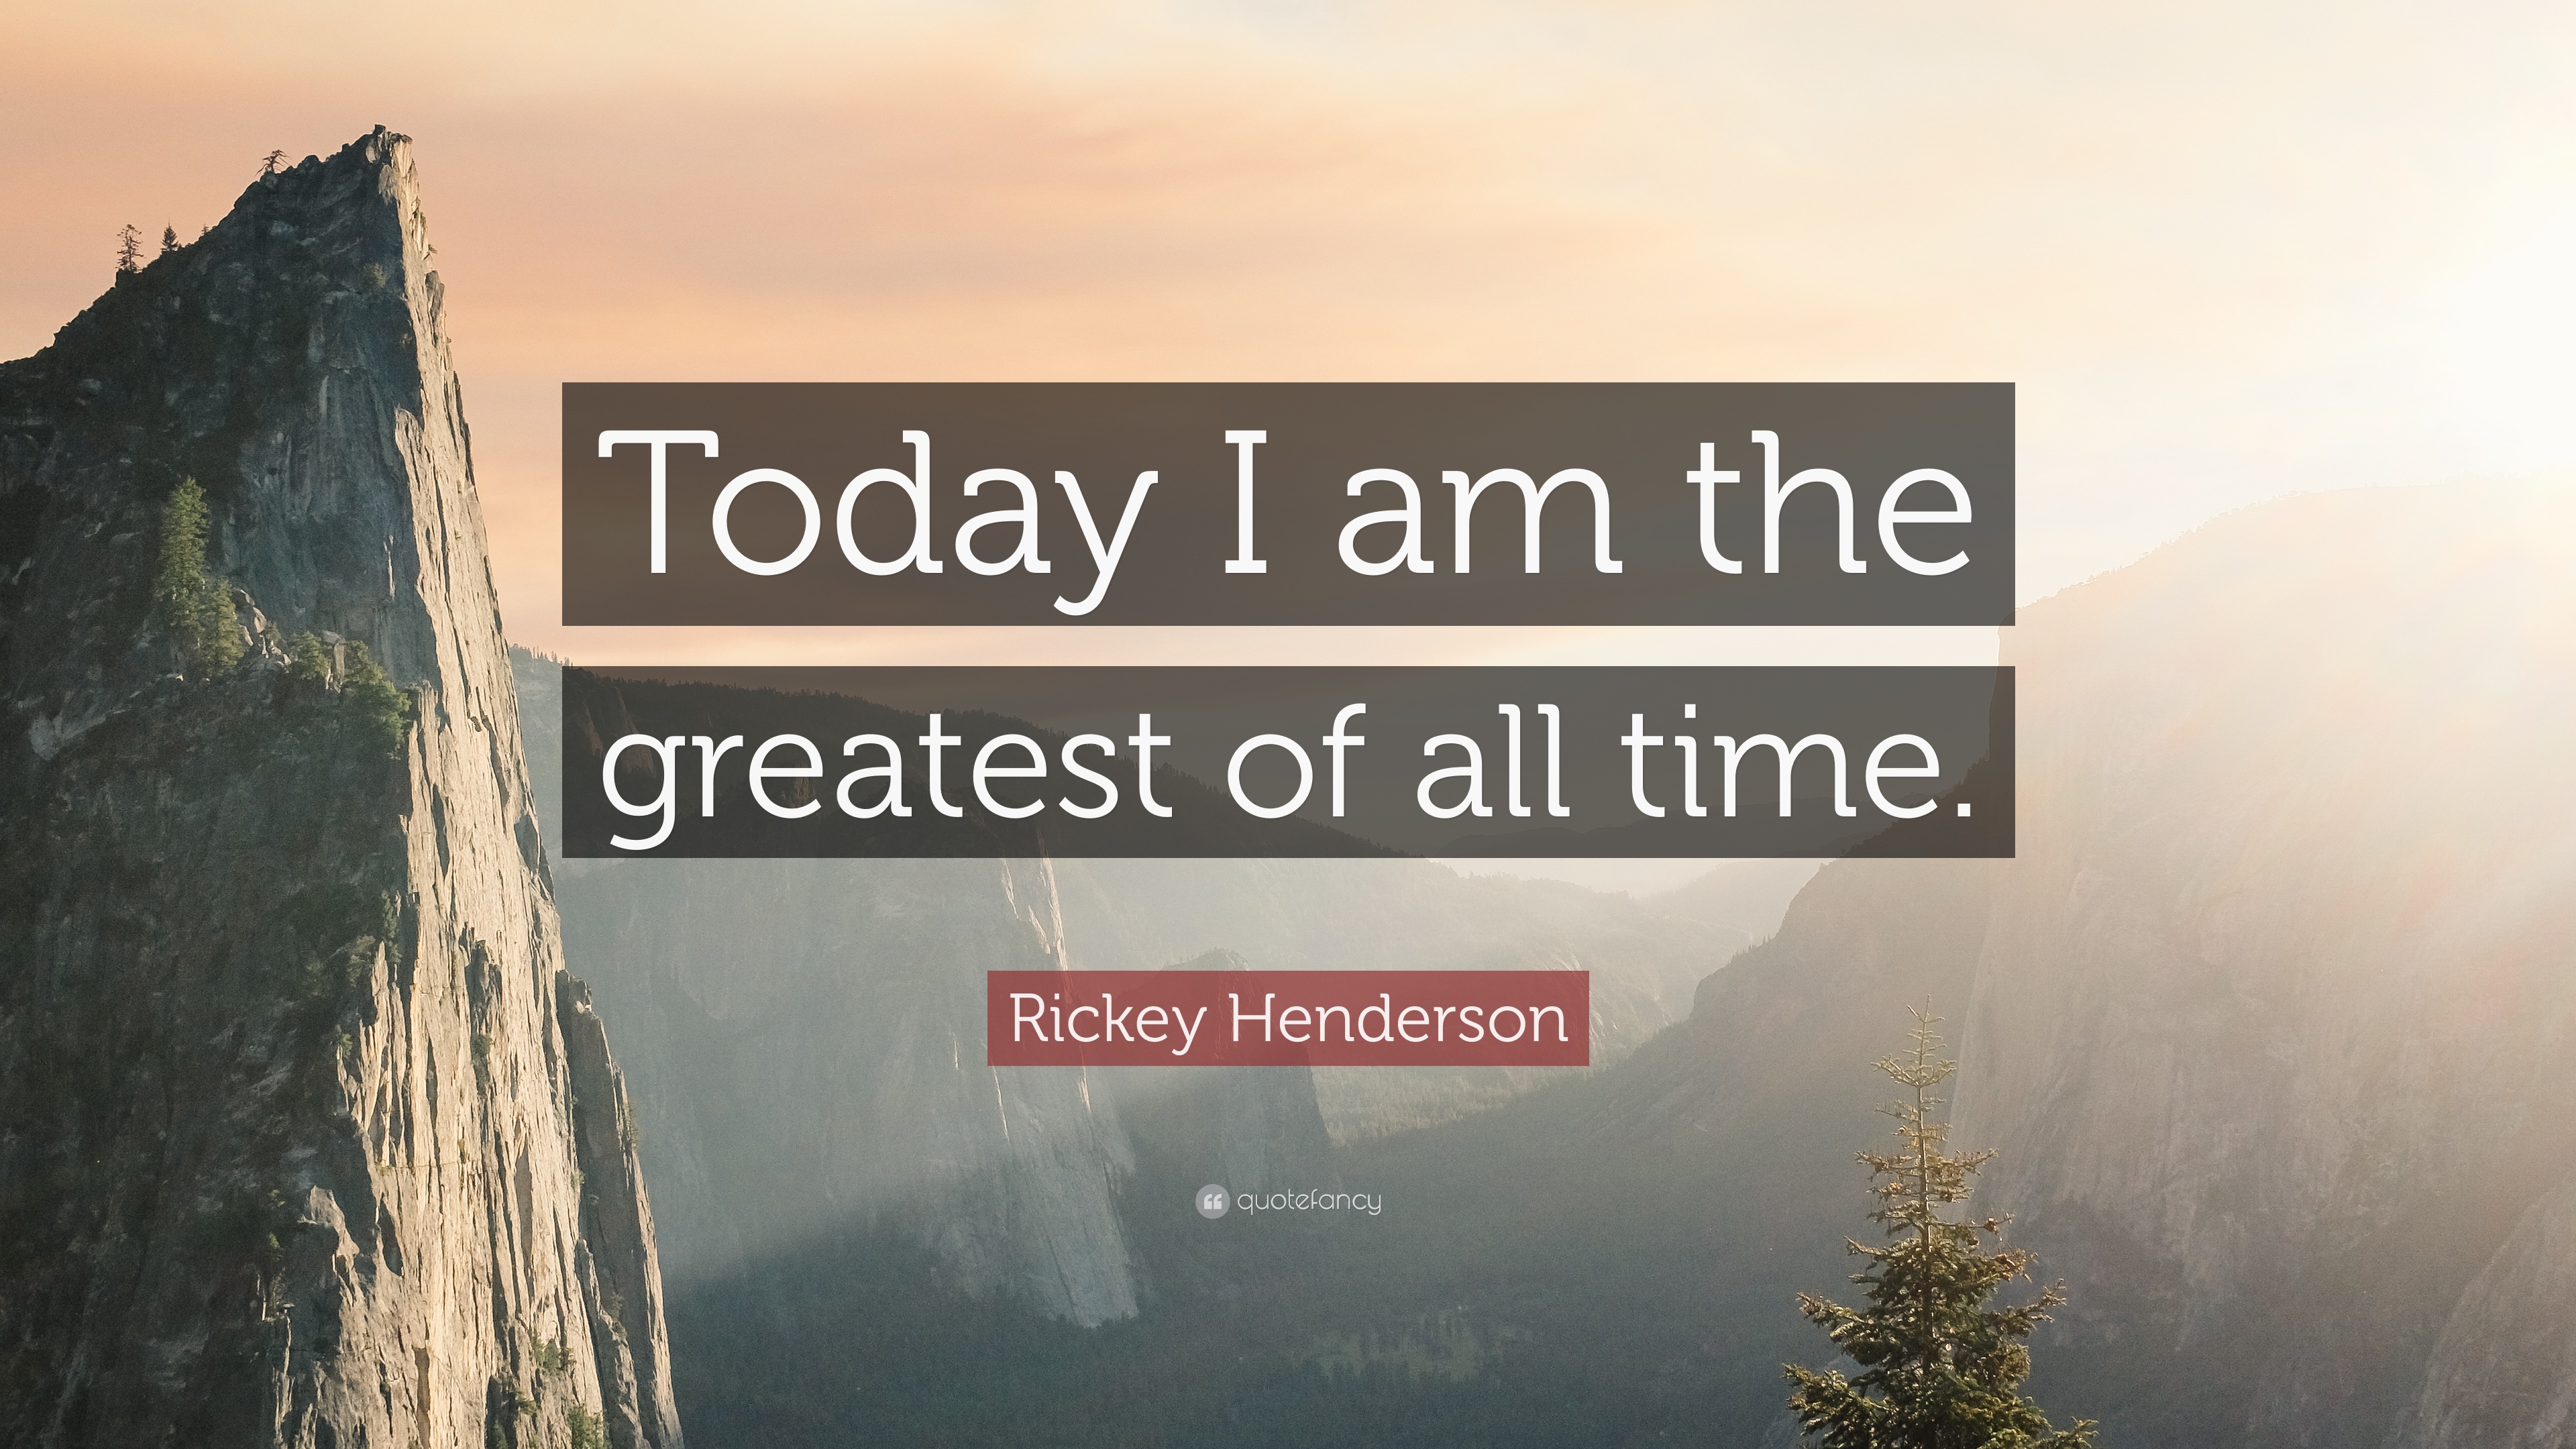 Rickey Henderson Quote: “Today I am the greatest of all time